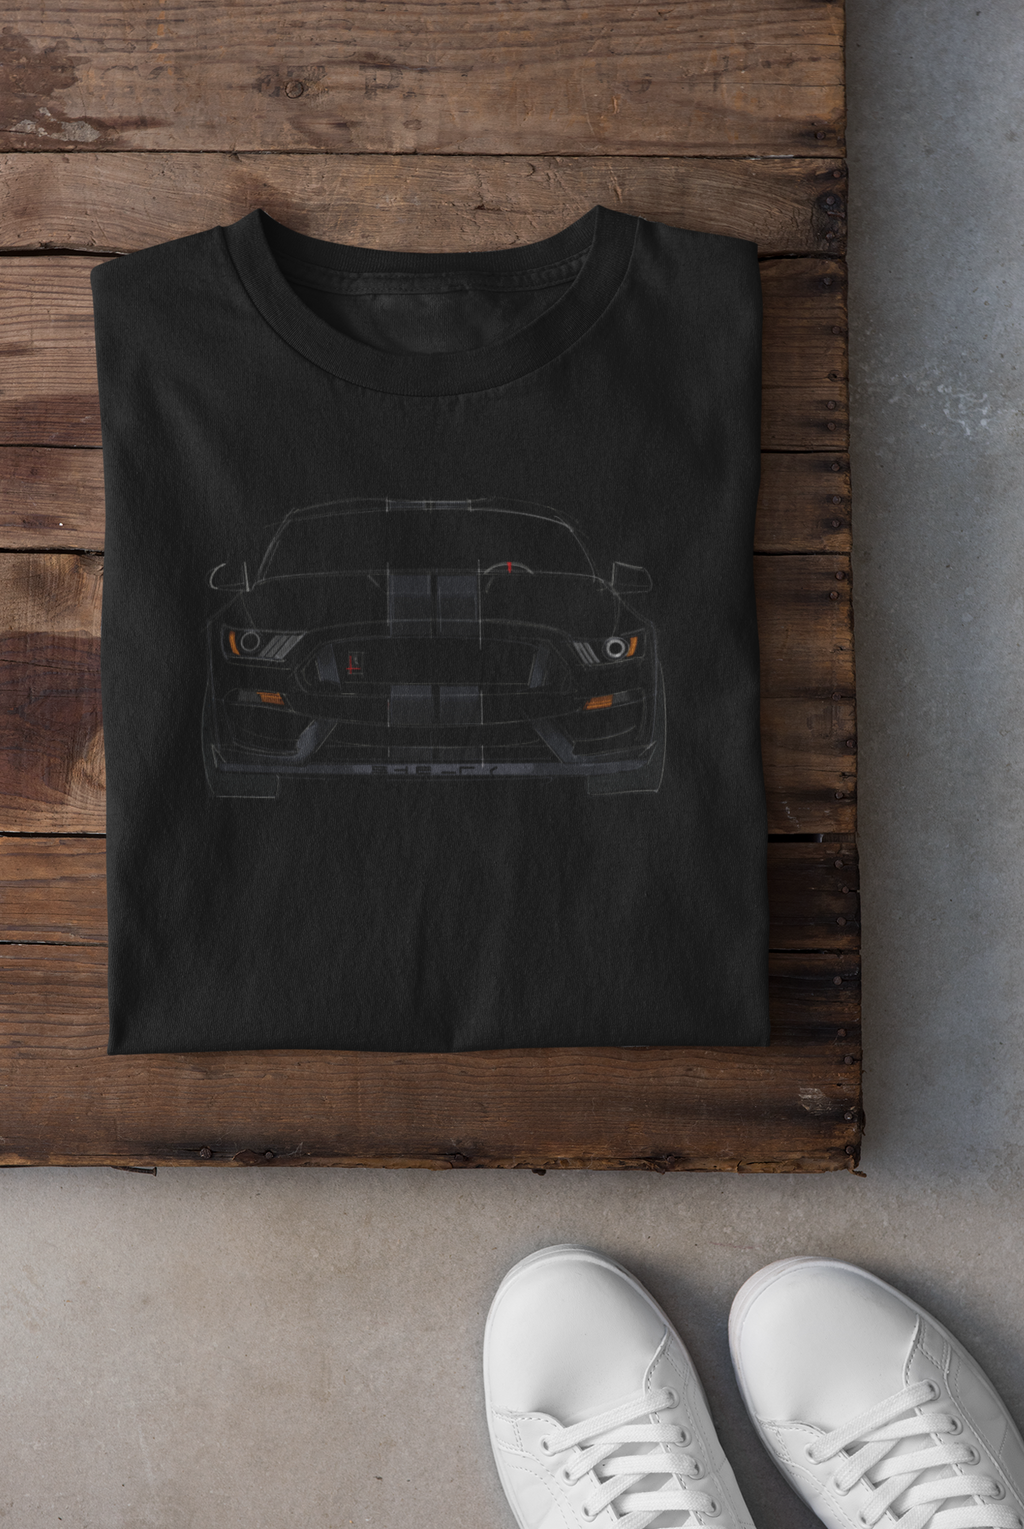 Go Baby Go! Shelby GT350 (Front & Rear Fascia) | T-Shirt